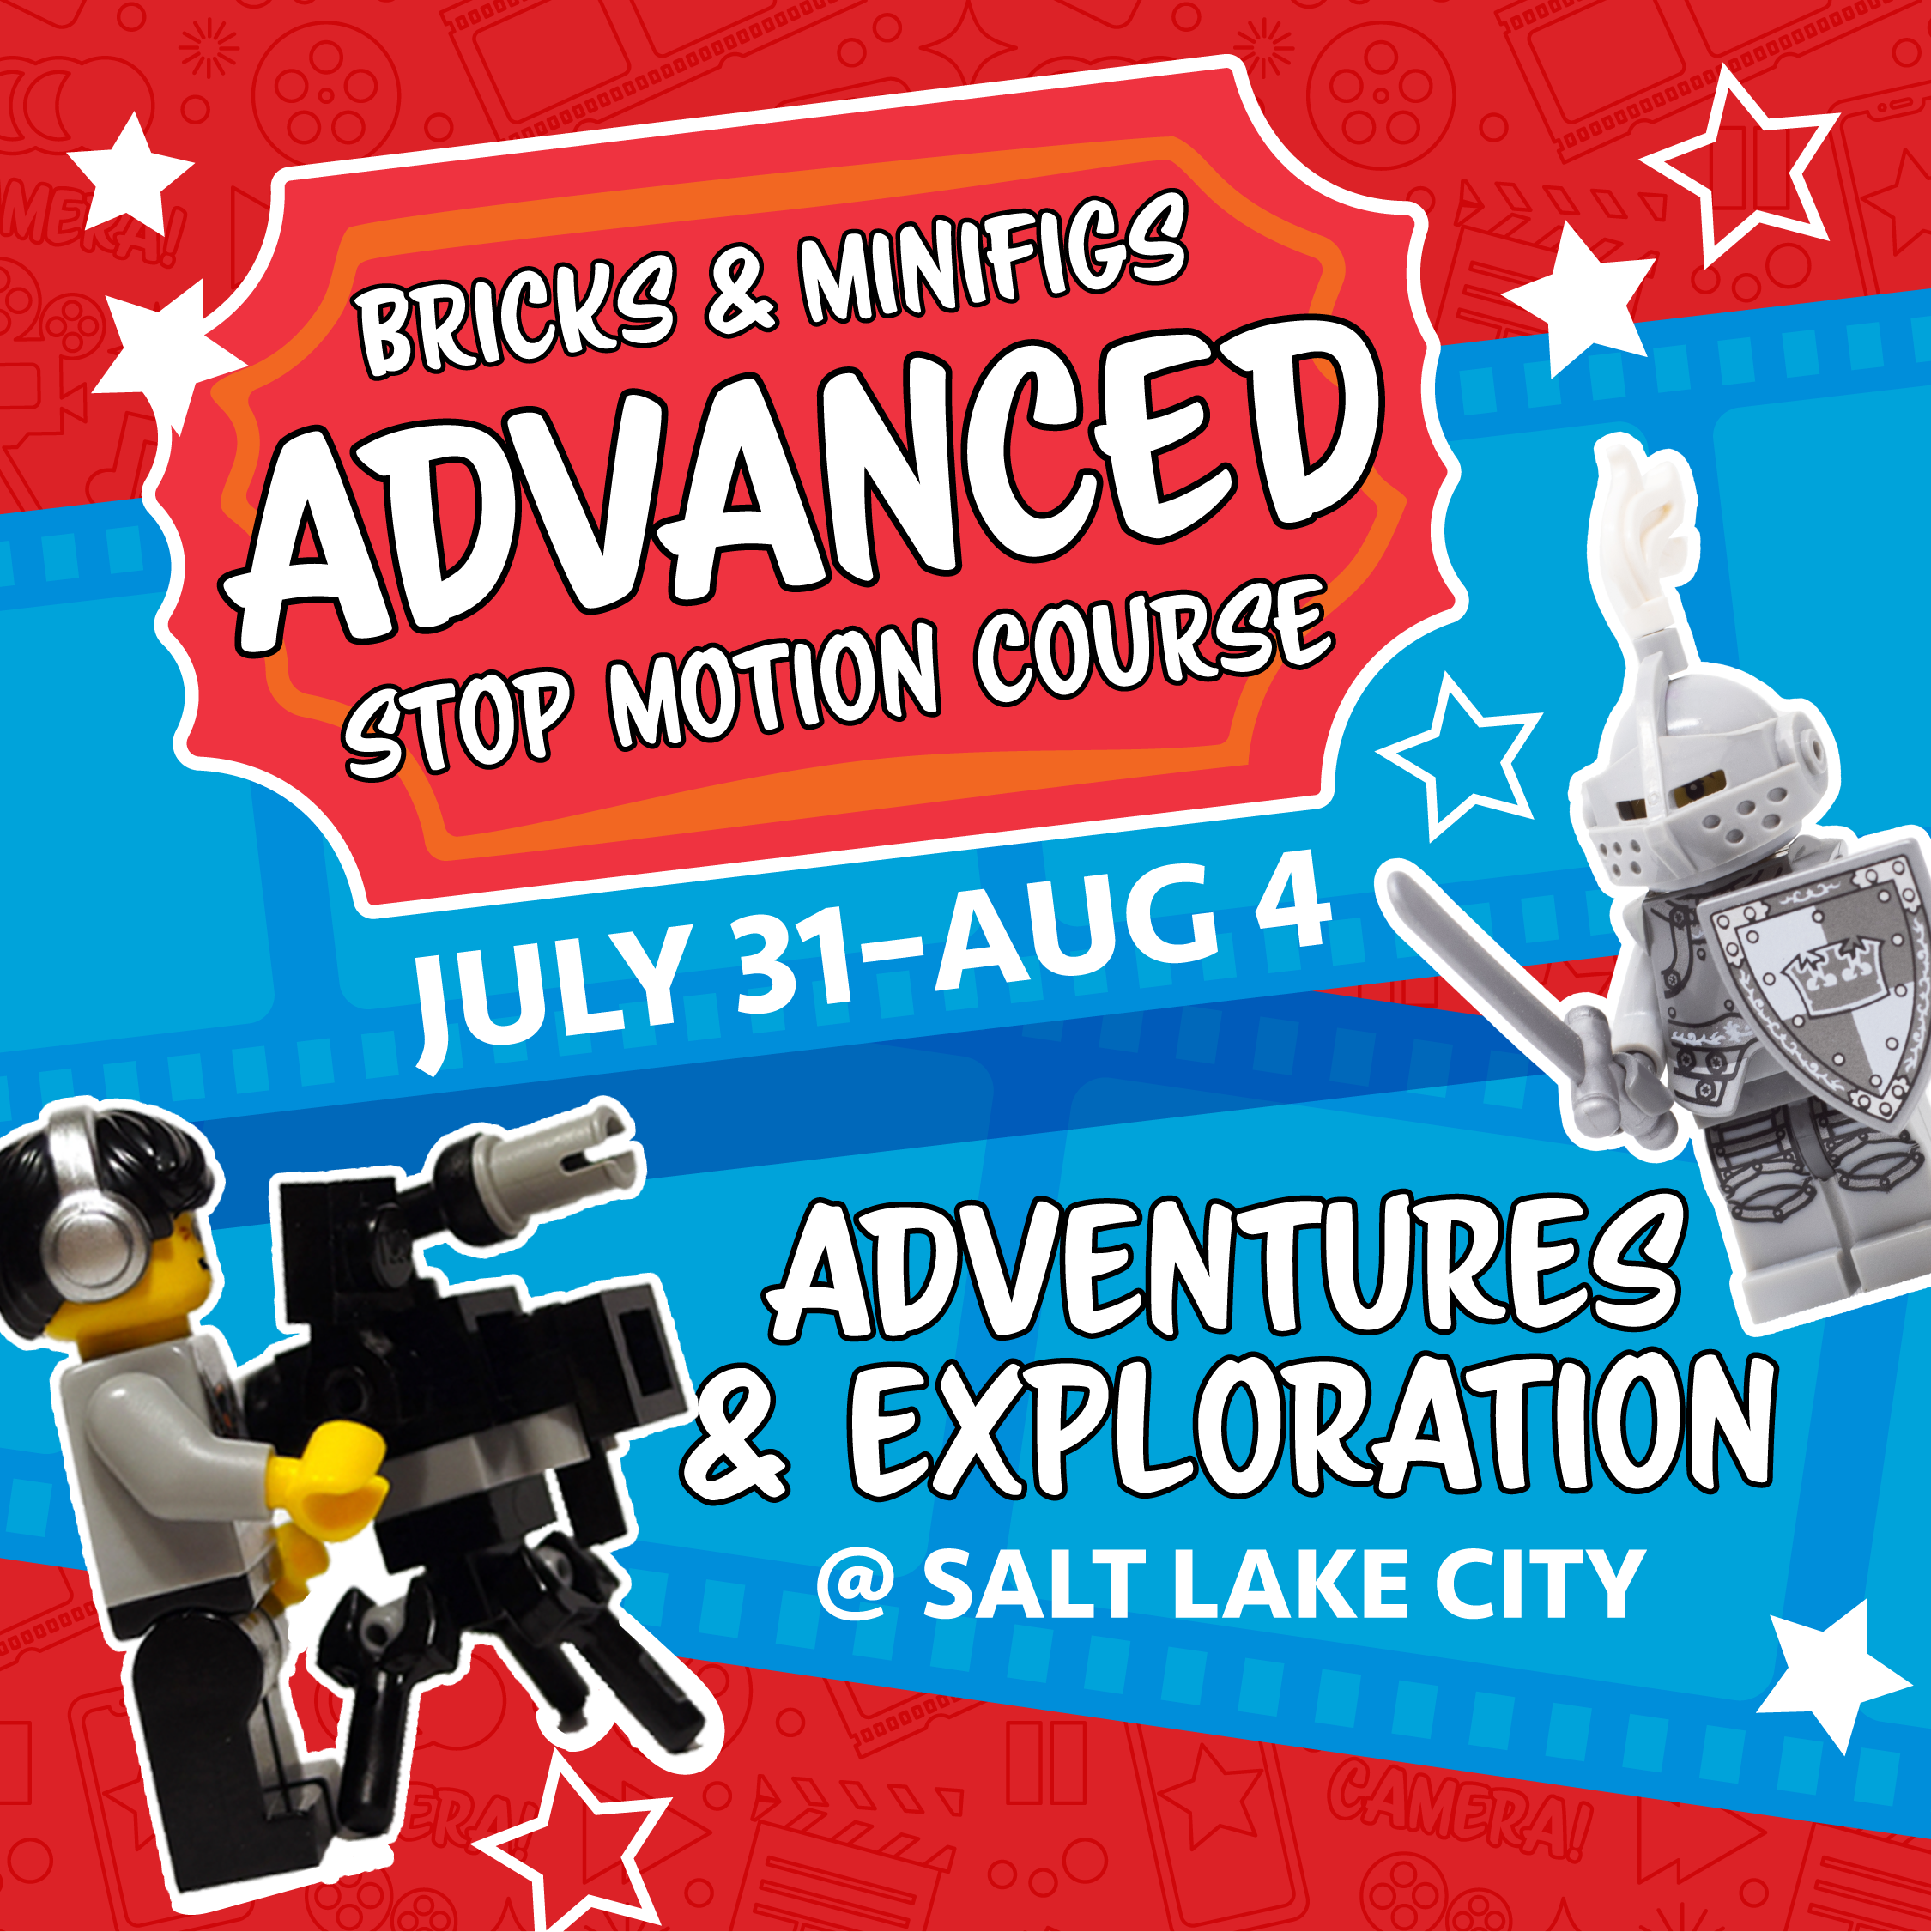 Advanced Stop Motion Course: Summer 2023 - Adventures and Exploration (July 31st - August 4th 2023, 3:00 - 5:00 pm, Salt Lake Location)